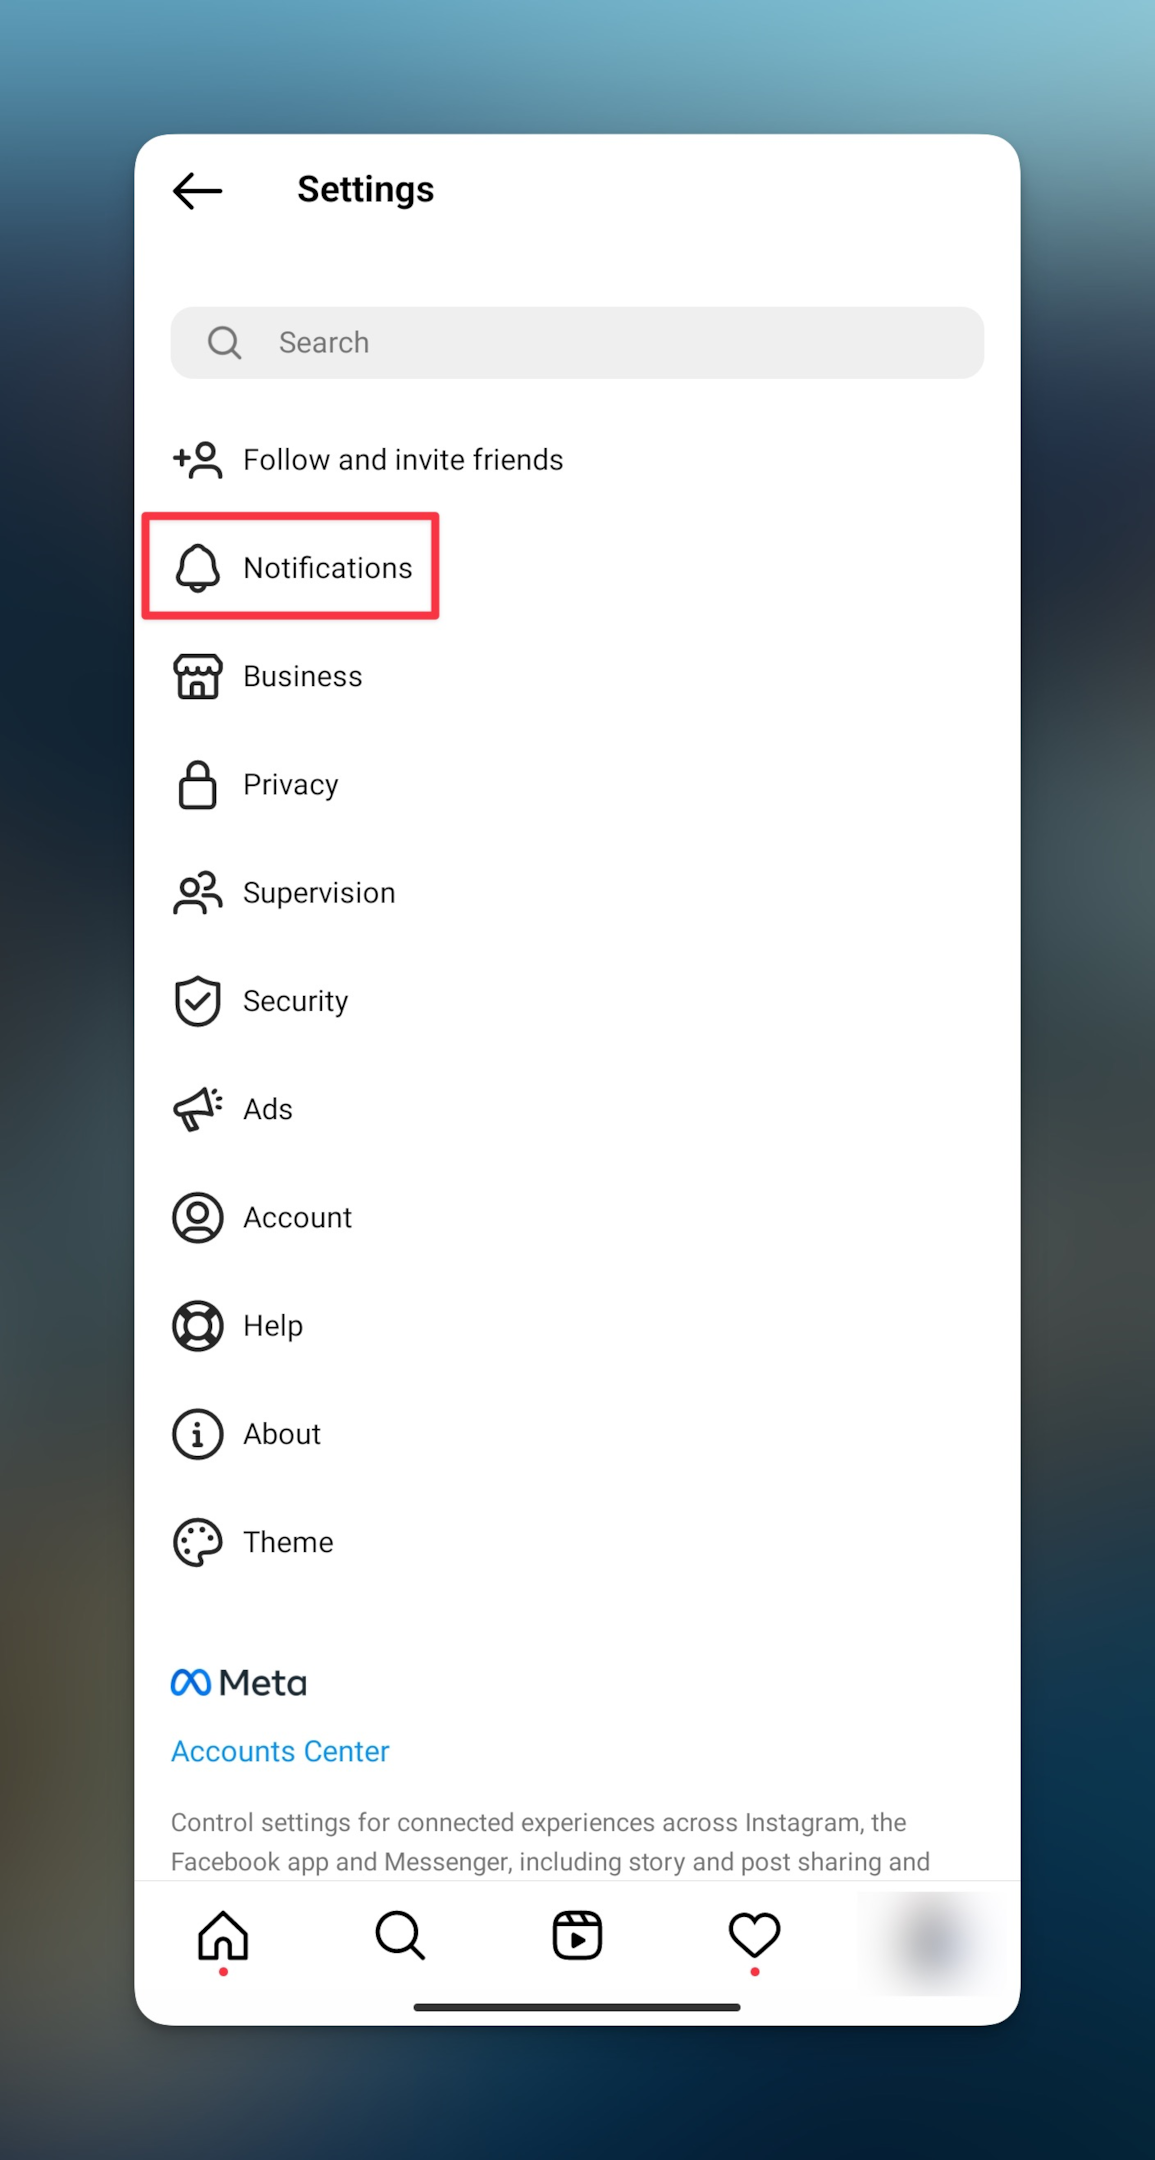 Remote.tools show to tap on "Notifications" to pause notifications for your account